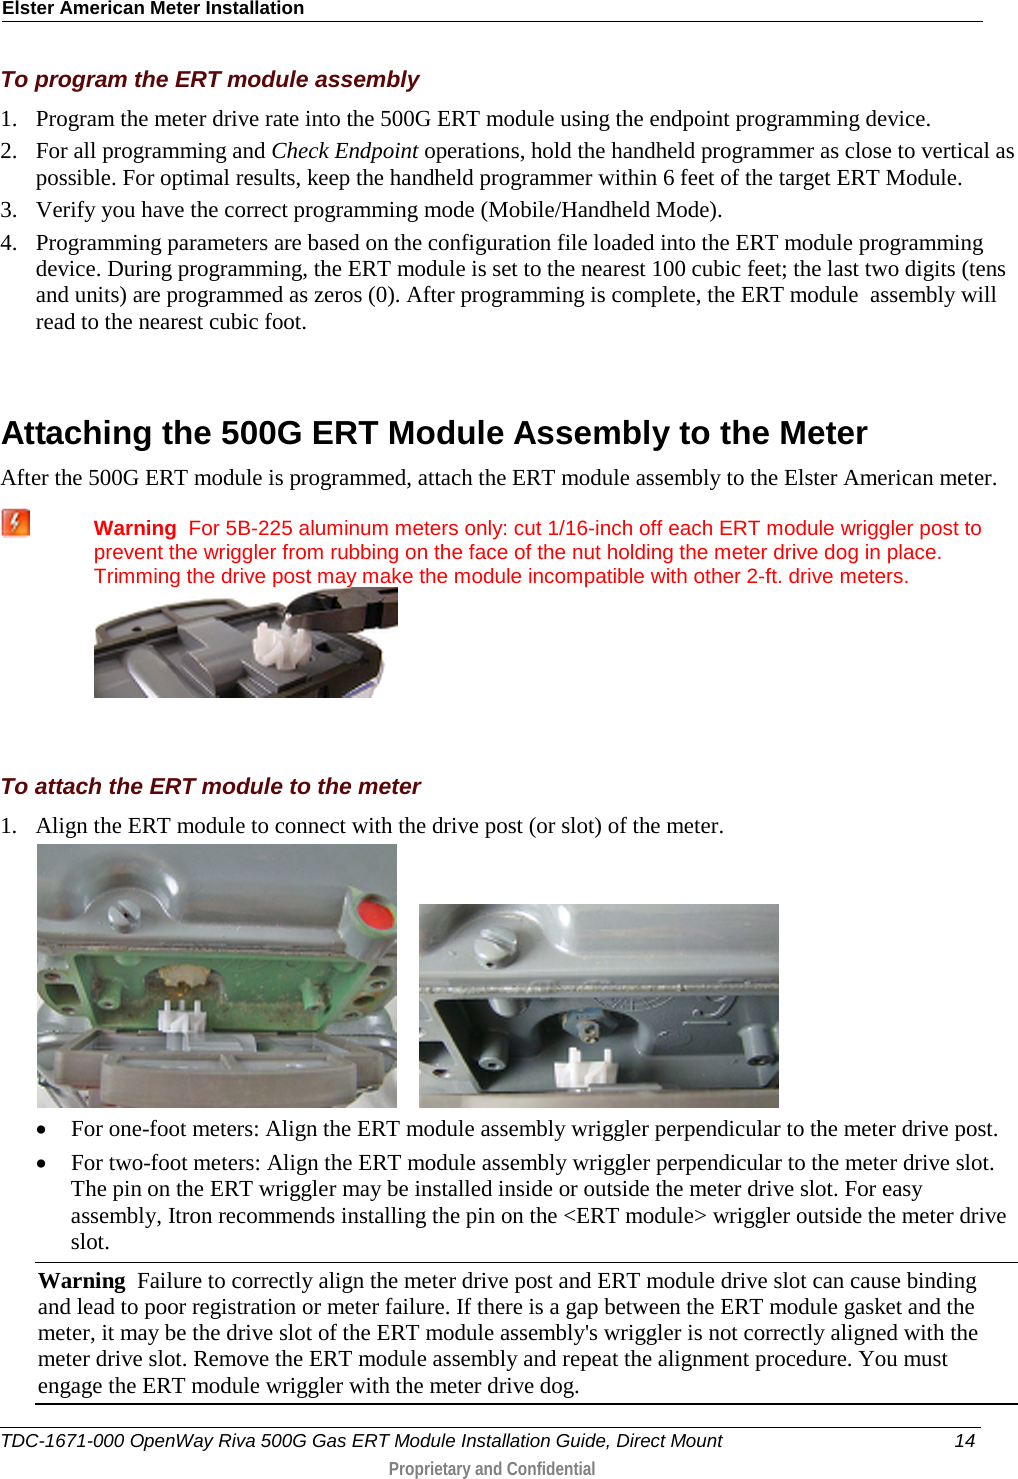 Elster American Meter Installation  To program the ERT module assembly 1. Program the meter drive rate into the 500G ERT module using the endpoint programming device.  2. For all programming and Check Endpoint operations, hold the handheld programmer as close to vertical as possible. For optimal results, keep the handheld programmer within 6 feet of the target ERT Module.  3. Verify you have the correct programming mode (Mobile/Handheld Mode).  4. Programming parameters are based on the configuration file loaded into the ERT module programming device. During programming, the ERT module is set to the nearest 100 cubic feet; the last two digits (tens and units) are programmed as zeros (0). After programming is complete, the ERT module  assembly will read to the nearest cubic foot.    Attaching the 500G ERT Module Assembly to the Meter After the 500G ERT module is programmed, attach the ERT module assembly to the Elster American meter.  Warning  For 5B-225 aluminum meters only: cut 1/16-inch off each ERT module wriggler post to prevent the wriggler from rubbing on the face of the nut holding the meter drive dog in place. Trimming the drive post may make the module incompatible with other 2-ft. drive meters.    To attach the ERT module to the meter 1. Align the ERT module to connect with the drive post (or slot) of the meter.       • For one-foot meters: Align the ERT module assembly wriggler perpendicular to the meter drive post. • For two-foot meters: Align the ERT module assembly wriggler perpendicular to the meter drive slot. The pin on the ERT wriggler may be installed inside or outside the meter drive slot. For easy assembly, Itron recommends installing the pin on the &lt;ERT module&gt; wriggler outside the meter drive slot.  Warning  Failure to correctly align the meter drive post and ERT module drive slot can cause binding and lead to poor registration or meter failure. If there is a gap between the ERT module gasket and the meter, it may be the drive slot of the ERT module assembly&apos;s wriggler is not correctly aligned with the meter drive slot. Remove the ERT module assembly and repeat the alignment procedure. You must engage the ERT module wriggler with the meter drive dog.  TDC-1671-000 OpenWay Riva 500G Gas ERT Module Installation Guide, Direct Mount 14  Proprietary and Confidential    